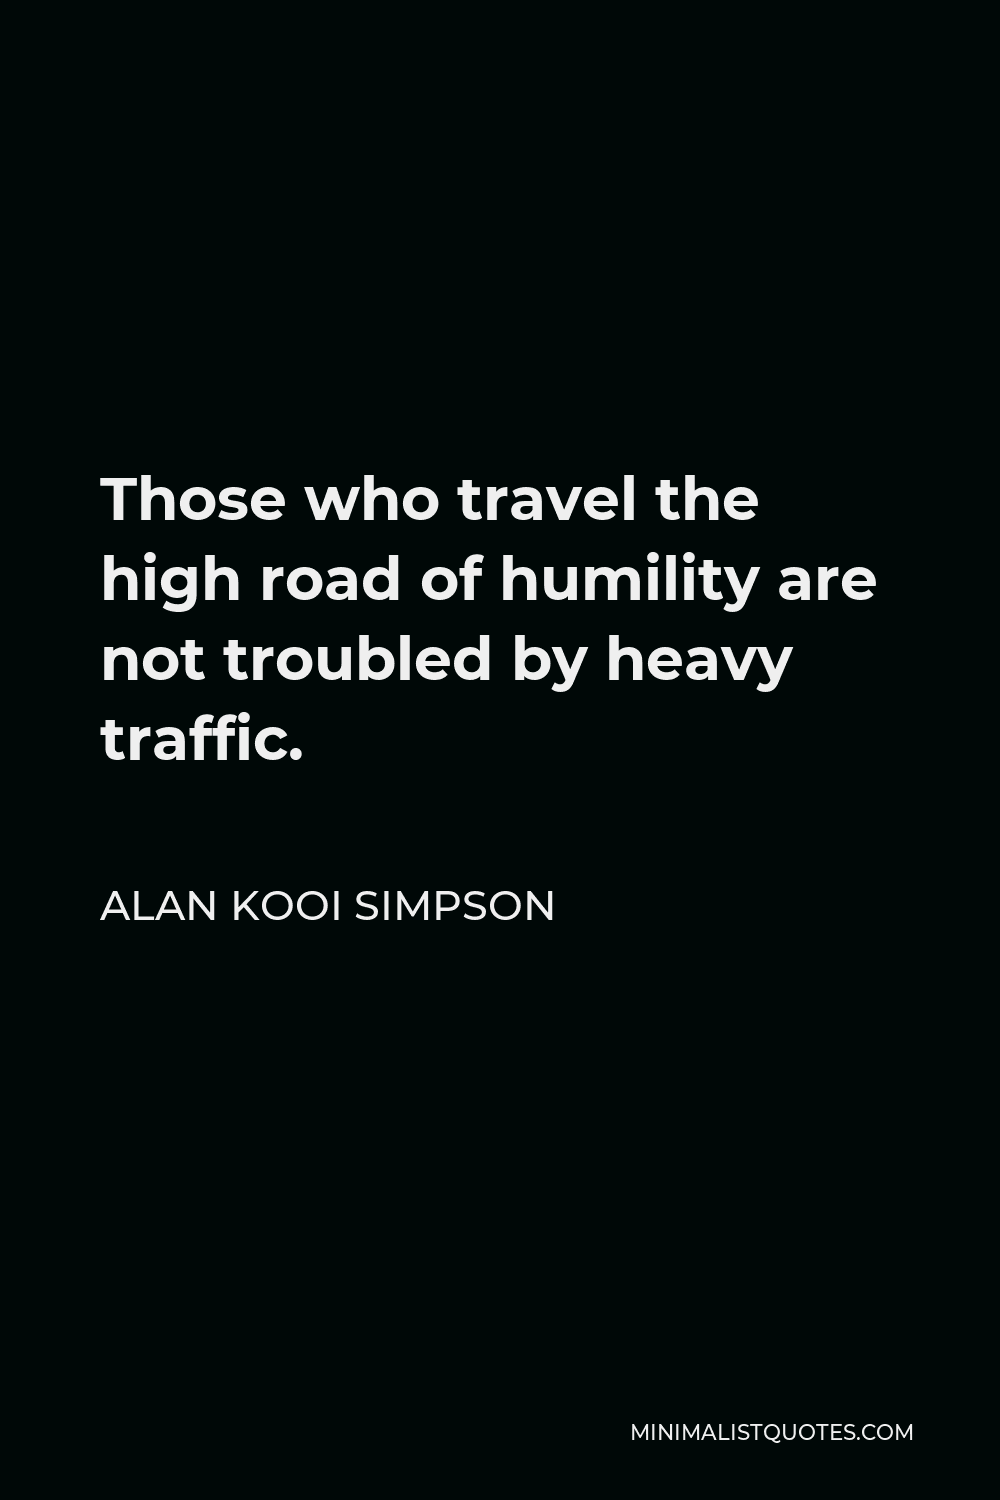 Alan Kooi Simpson Quote - Those who travel the high road of humility are not troubled by heavy traffic.